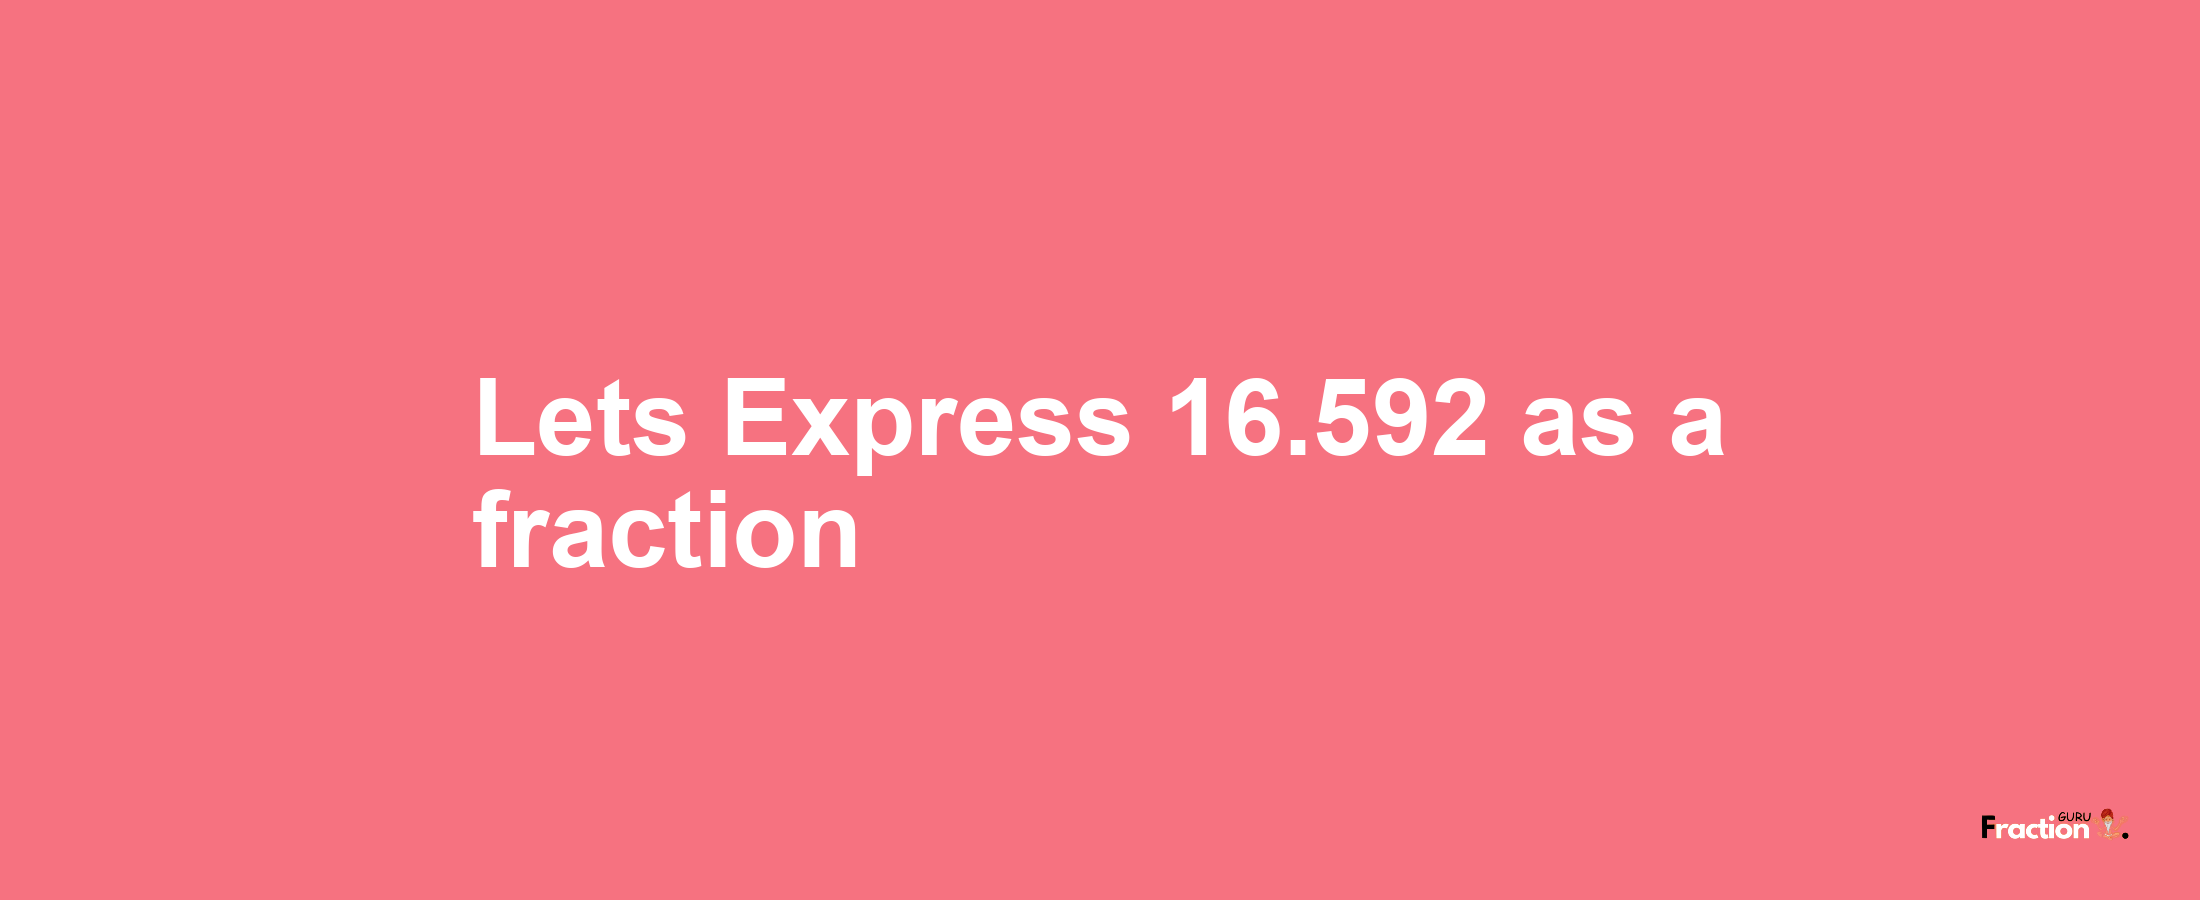 Lets Express 16.592 as afraction